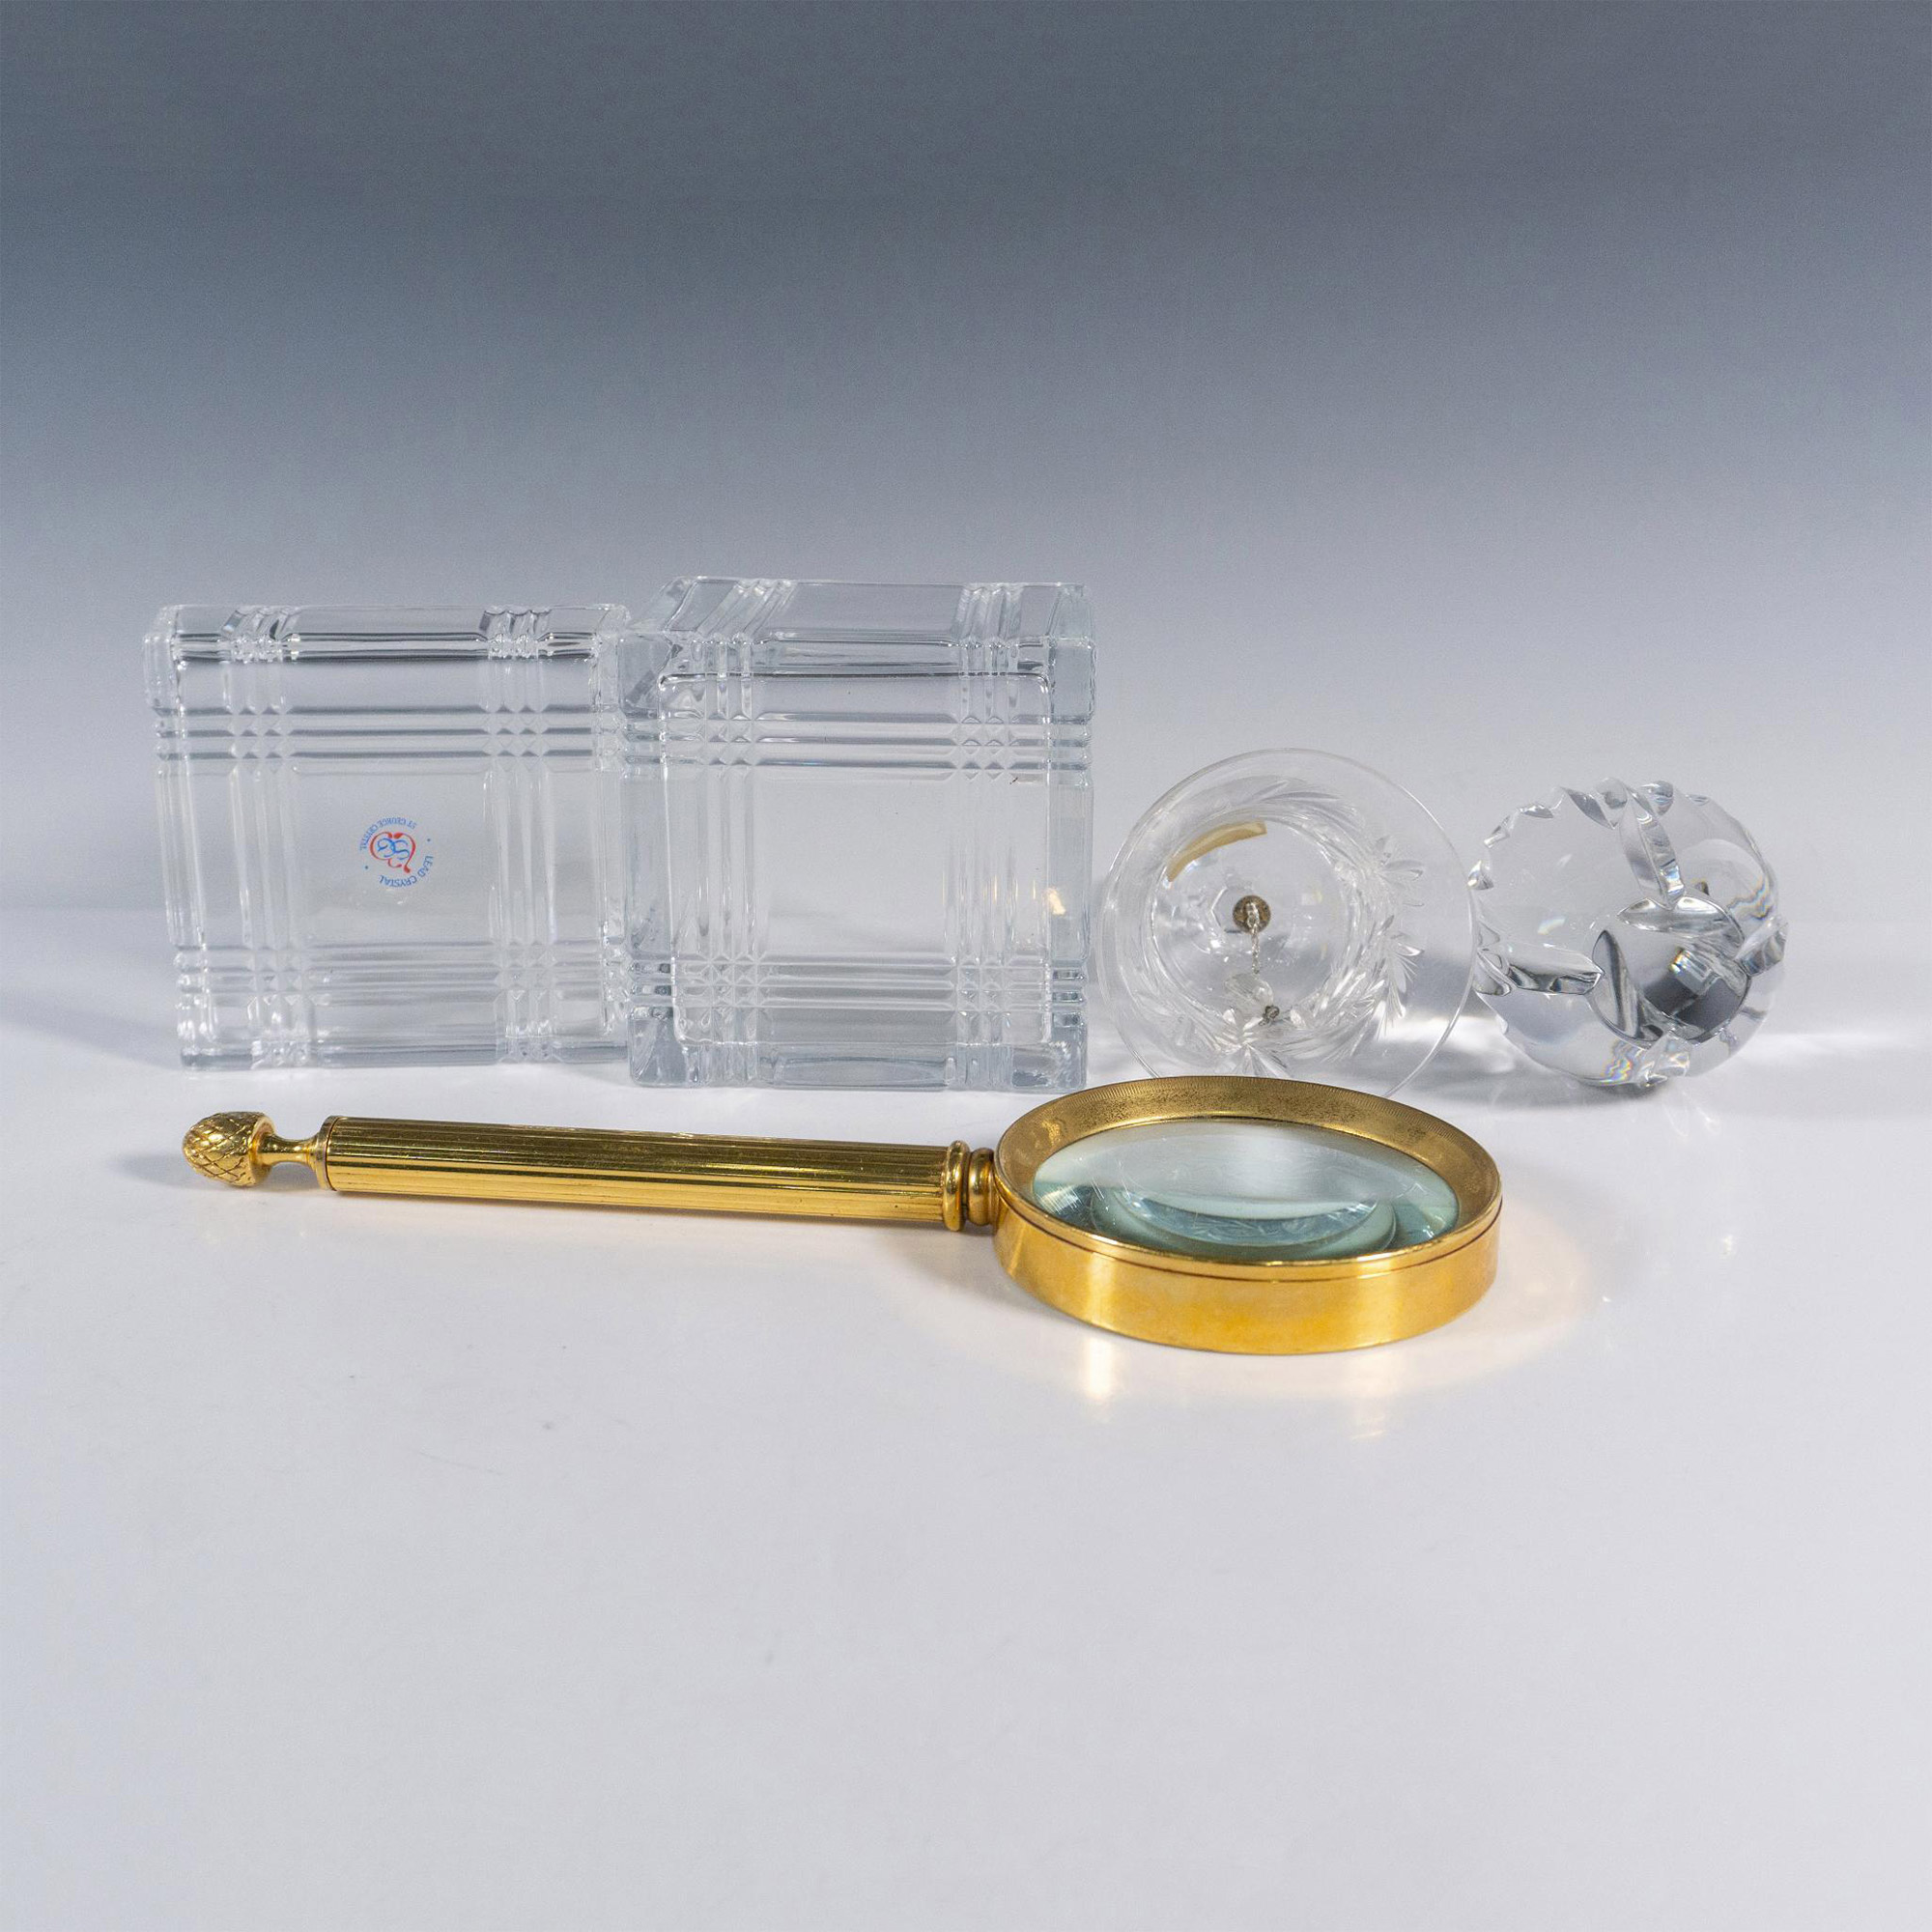 4pc Crystal Desk Accessories & Gold Magnifying Glass - Image 2 of 2